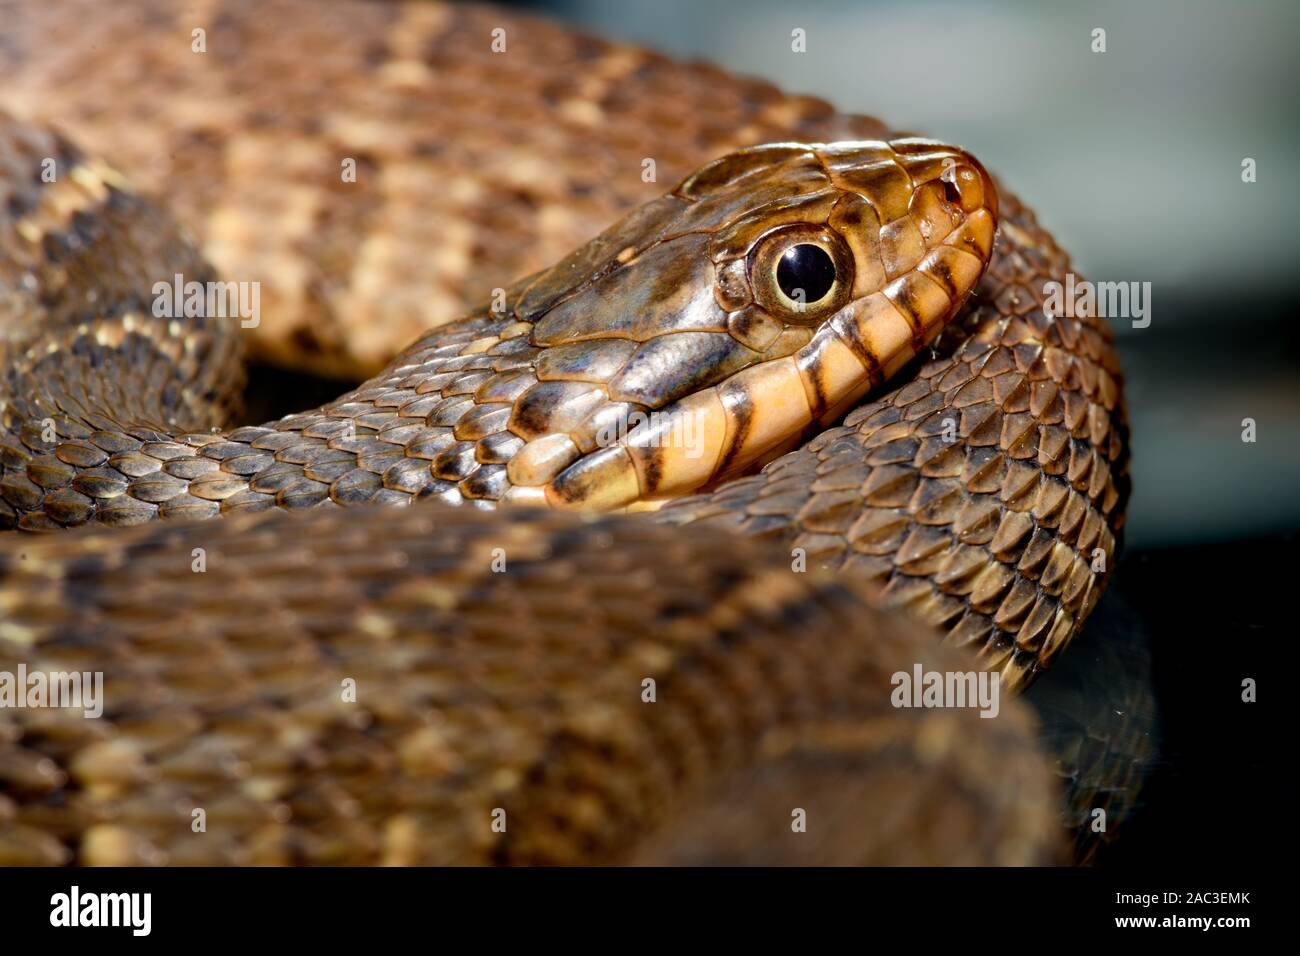 plain-bellied water snake (Nerodia erythrogaster flavigaster) Coiled close-up of head profile Stock Photo